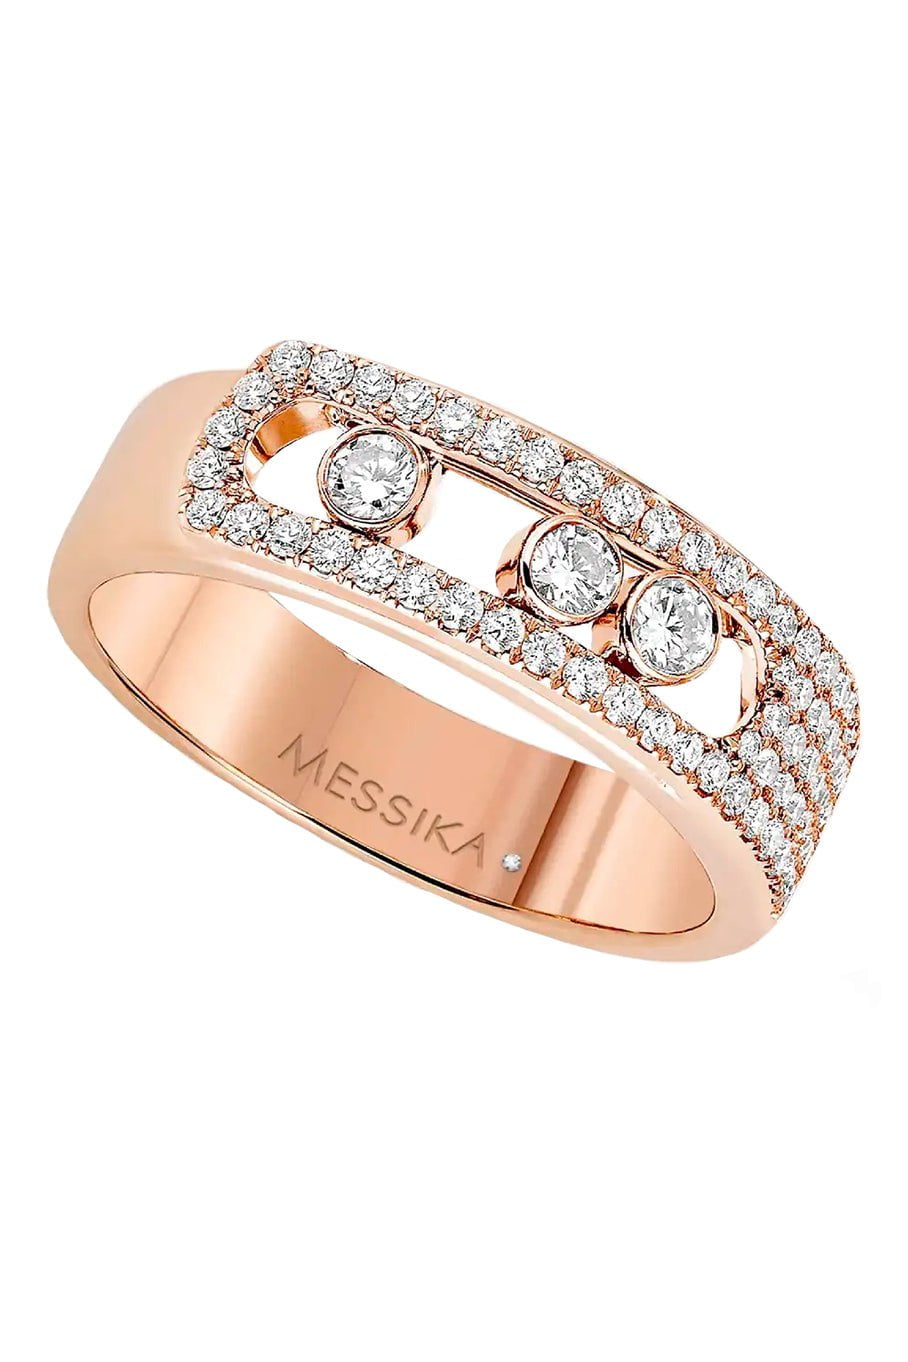 MESSIKA-Move Noa Pave Ring-ROSE GOLD